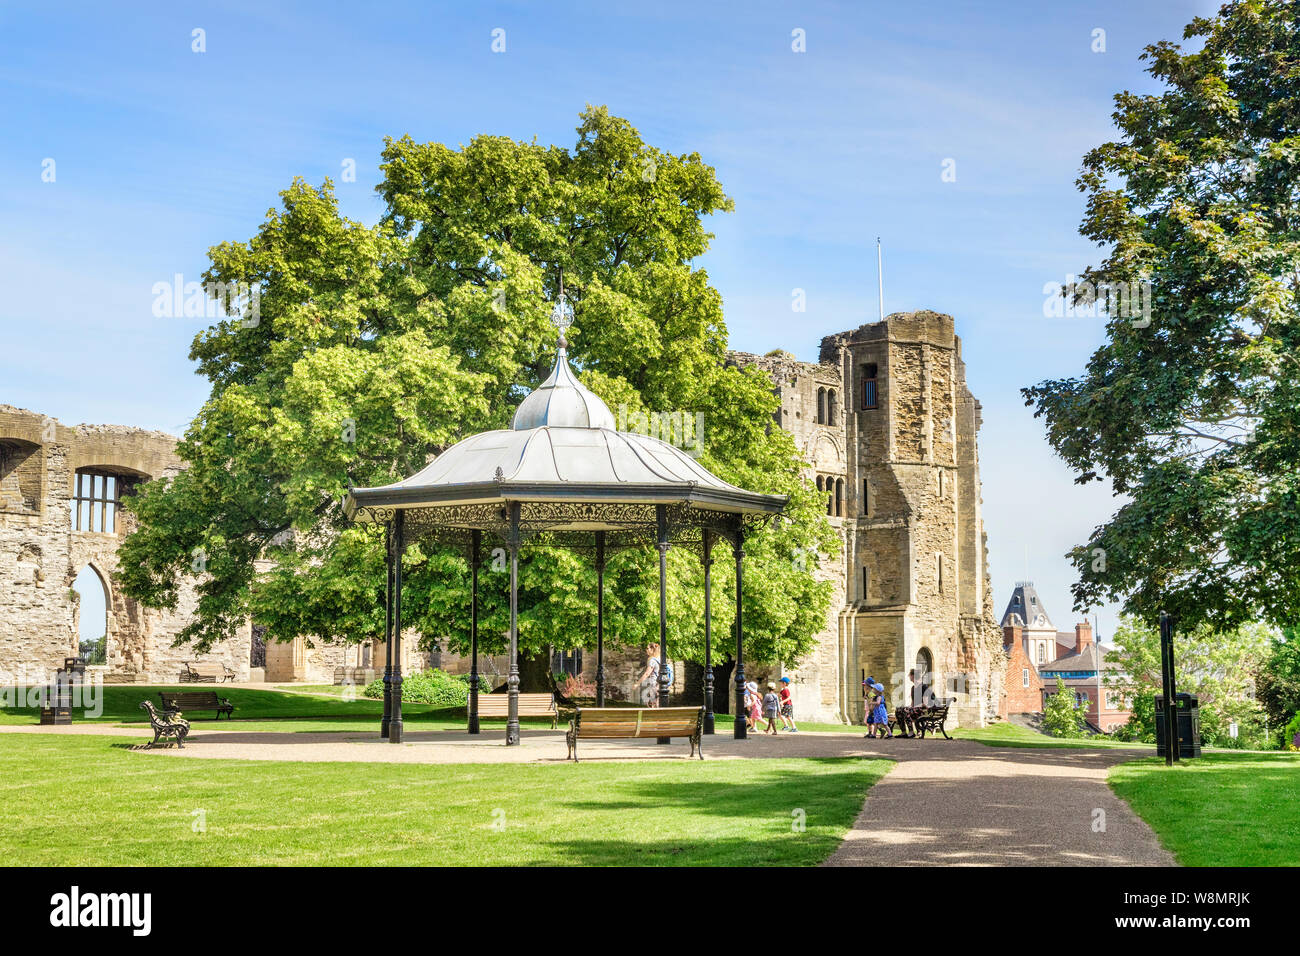 4 July 2019: Newark on Trent, Nottinghamshire, UK - The 12th century castle and gardens, and the bandstand, with a distant party of children on a visi Stock Photo